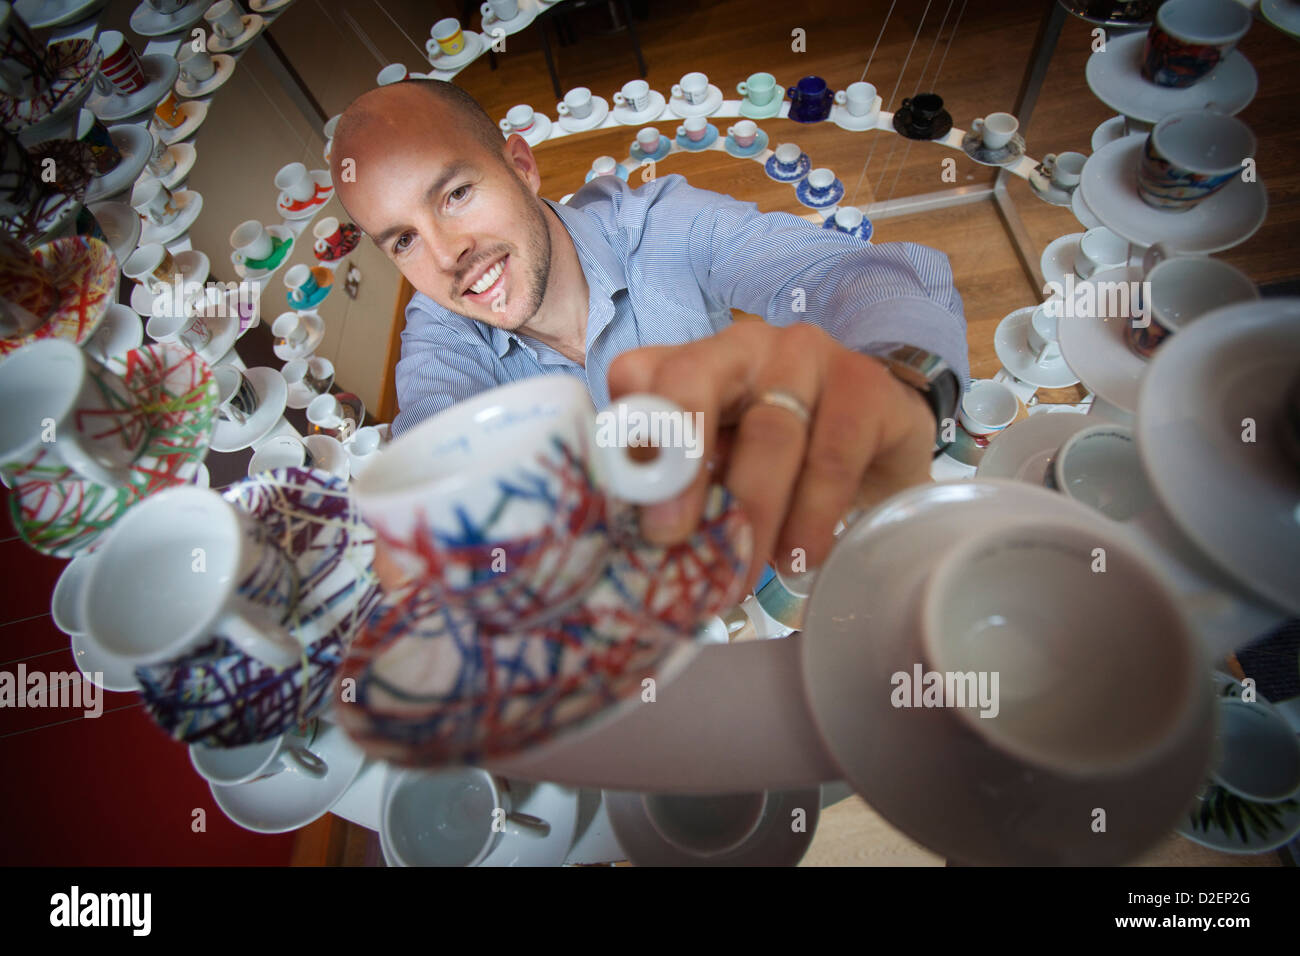 Illy art cups go on display in Manchester UK Stock Photo